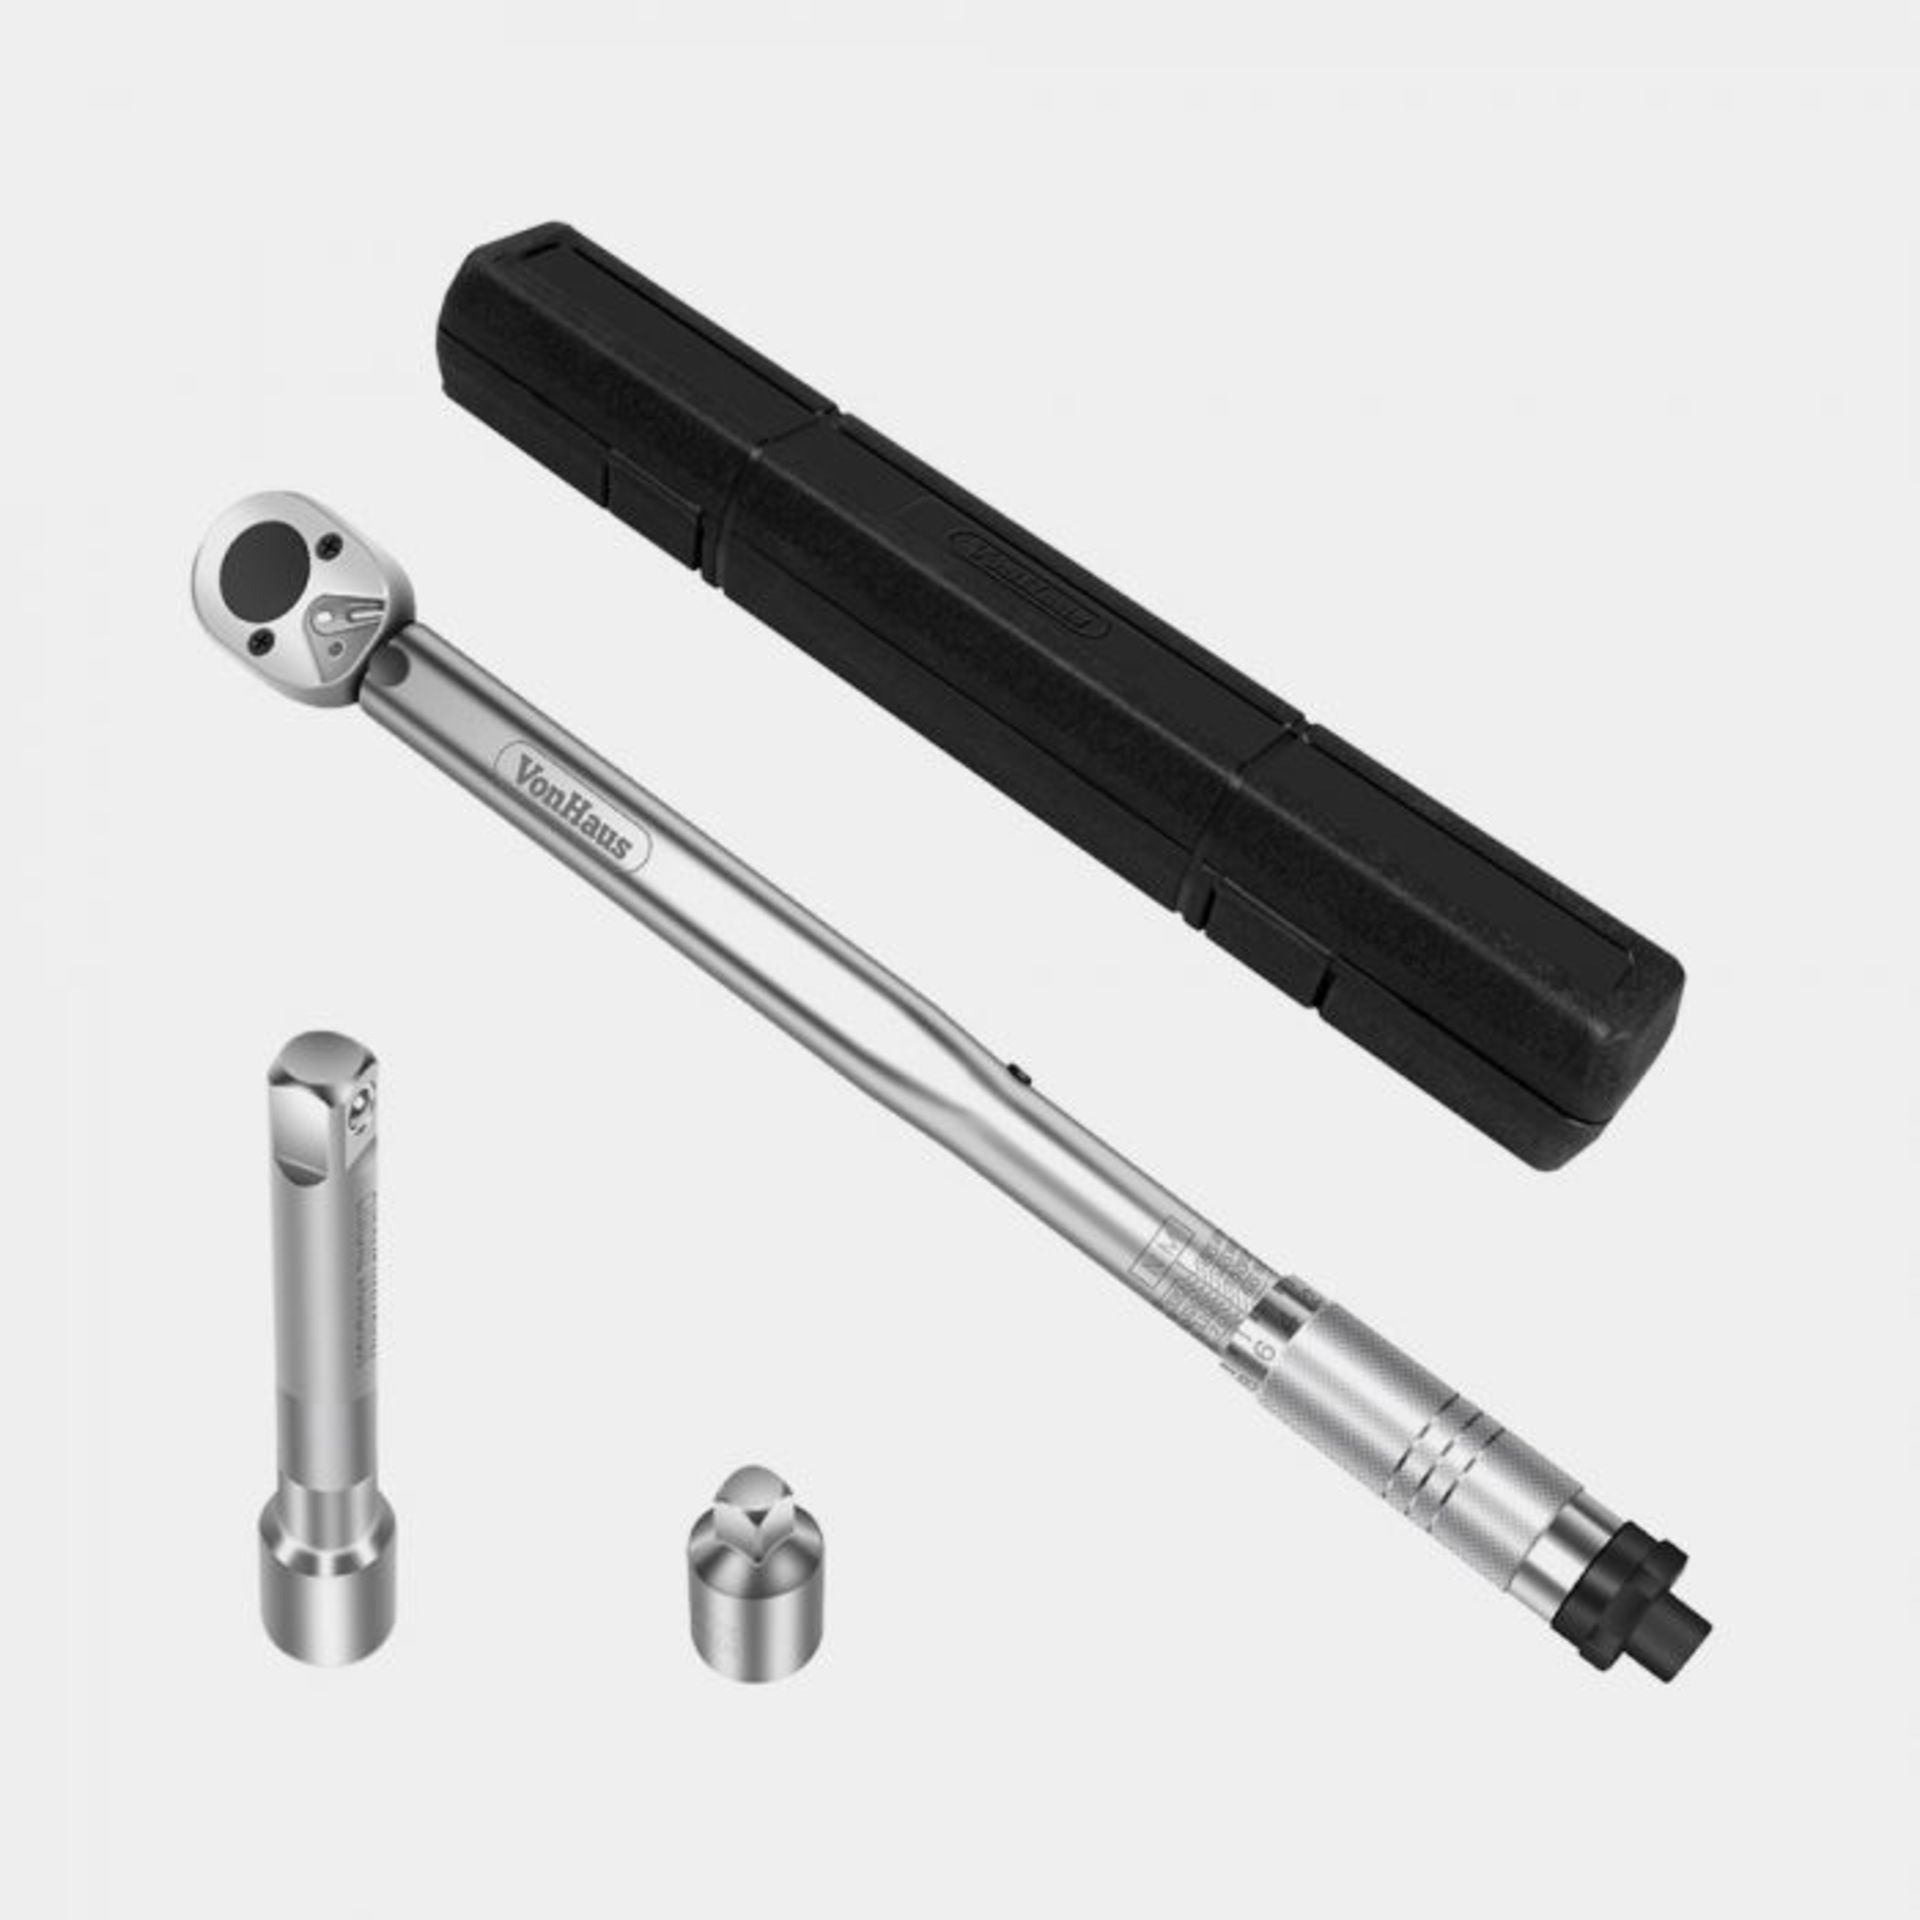 1/2'' Torque Wrench with Reducer & Extension Bar. The set comes with 1/2” extension bar and 1/2"